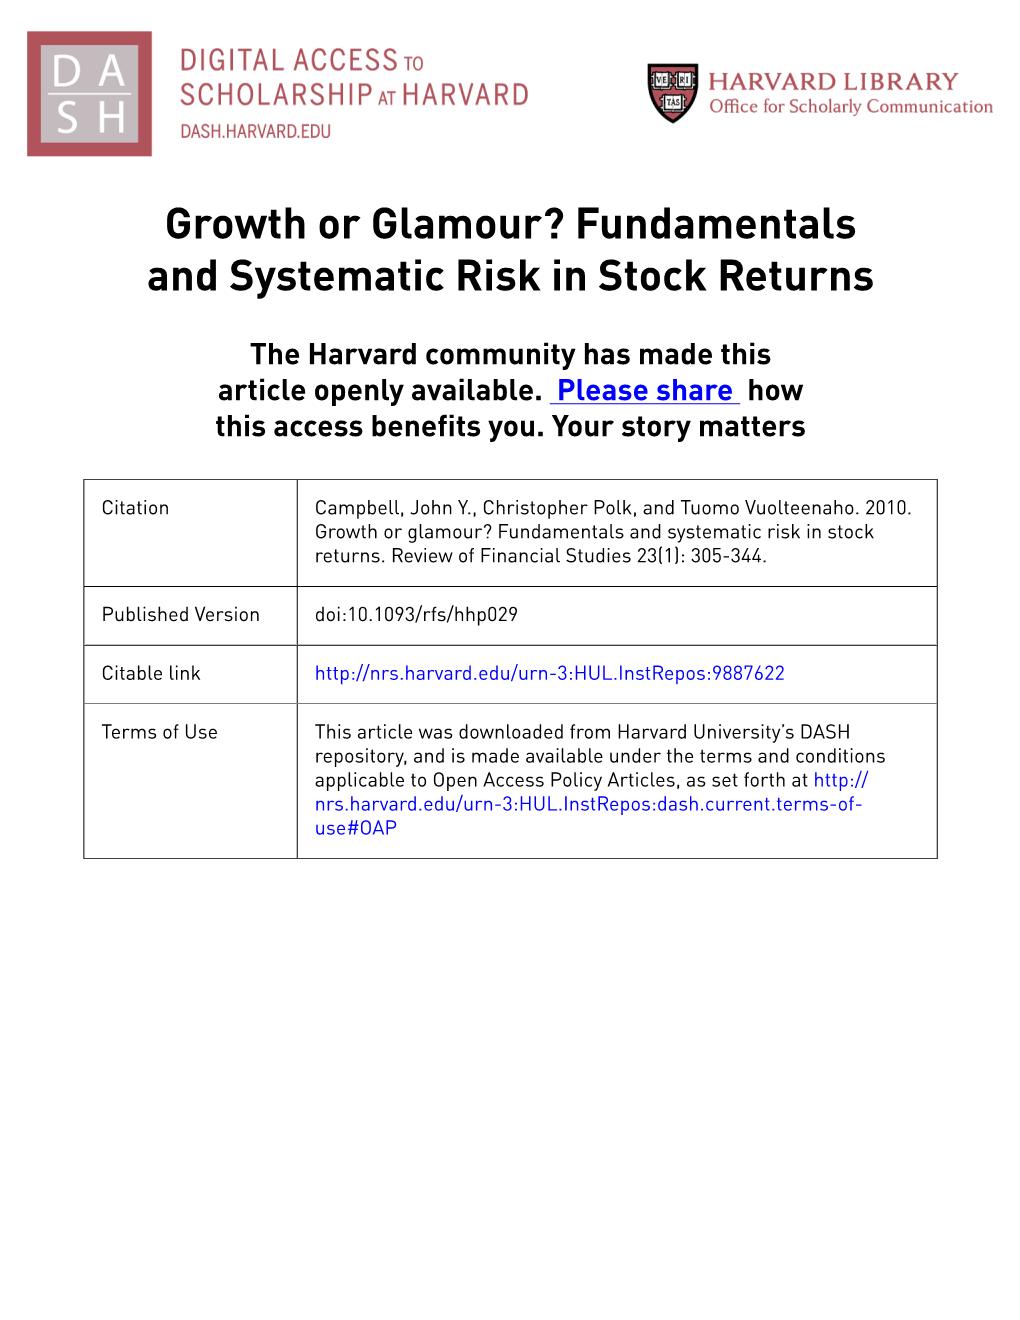 Growth Or Glamour? Fundamentals and Systematic Risk in Stock Returns